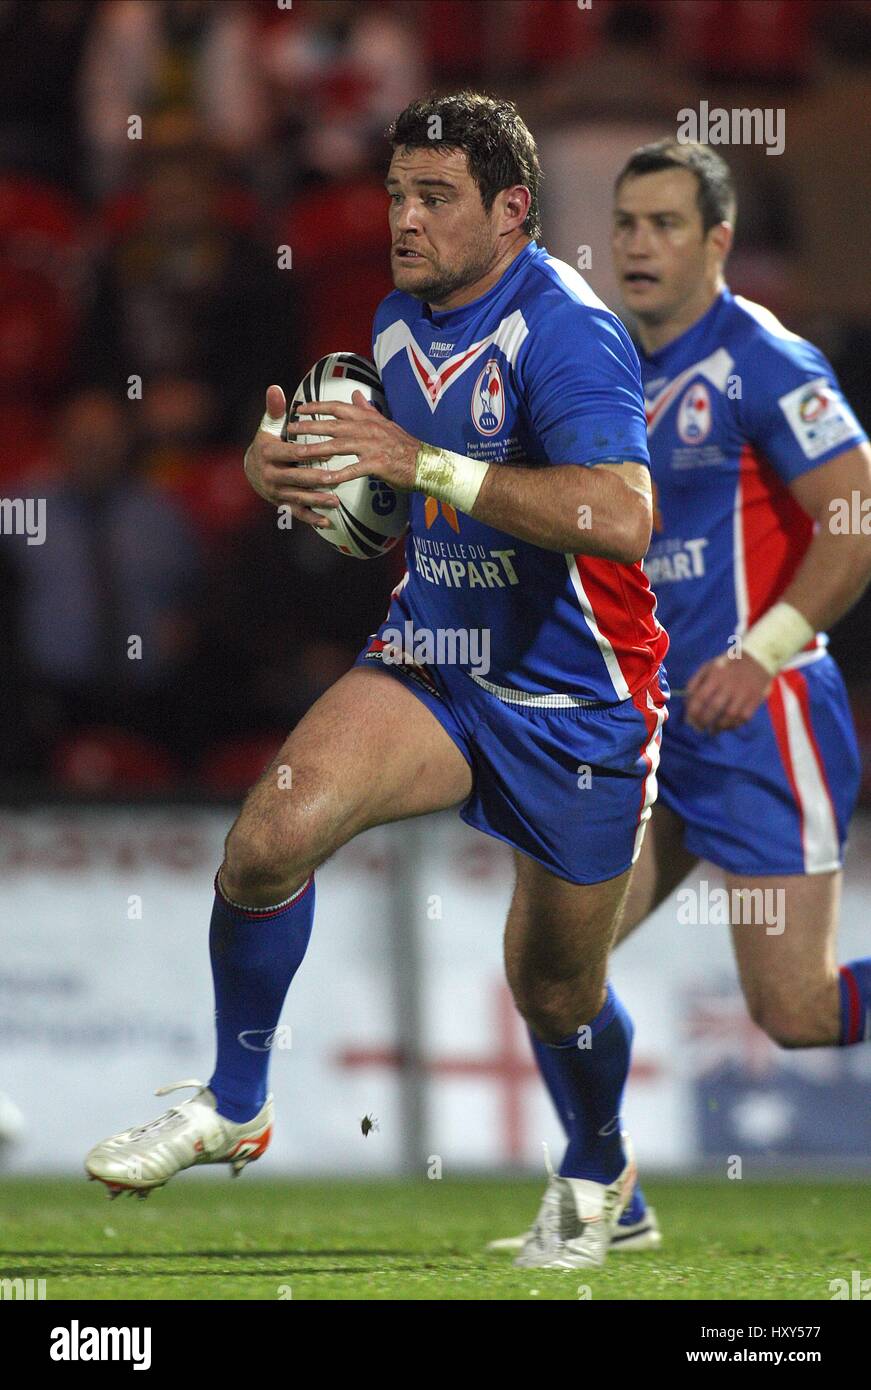 DAVID FERRIOL FRANCE RUGBY LEAGUE KEEPMOAT STADIUM DONCASTER ENGLAND 23 October 2009 Stock Photo